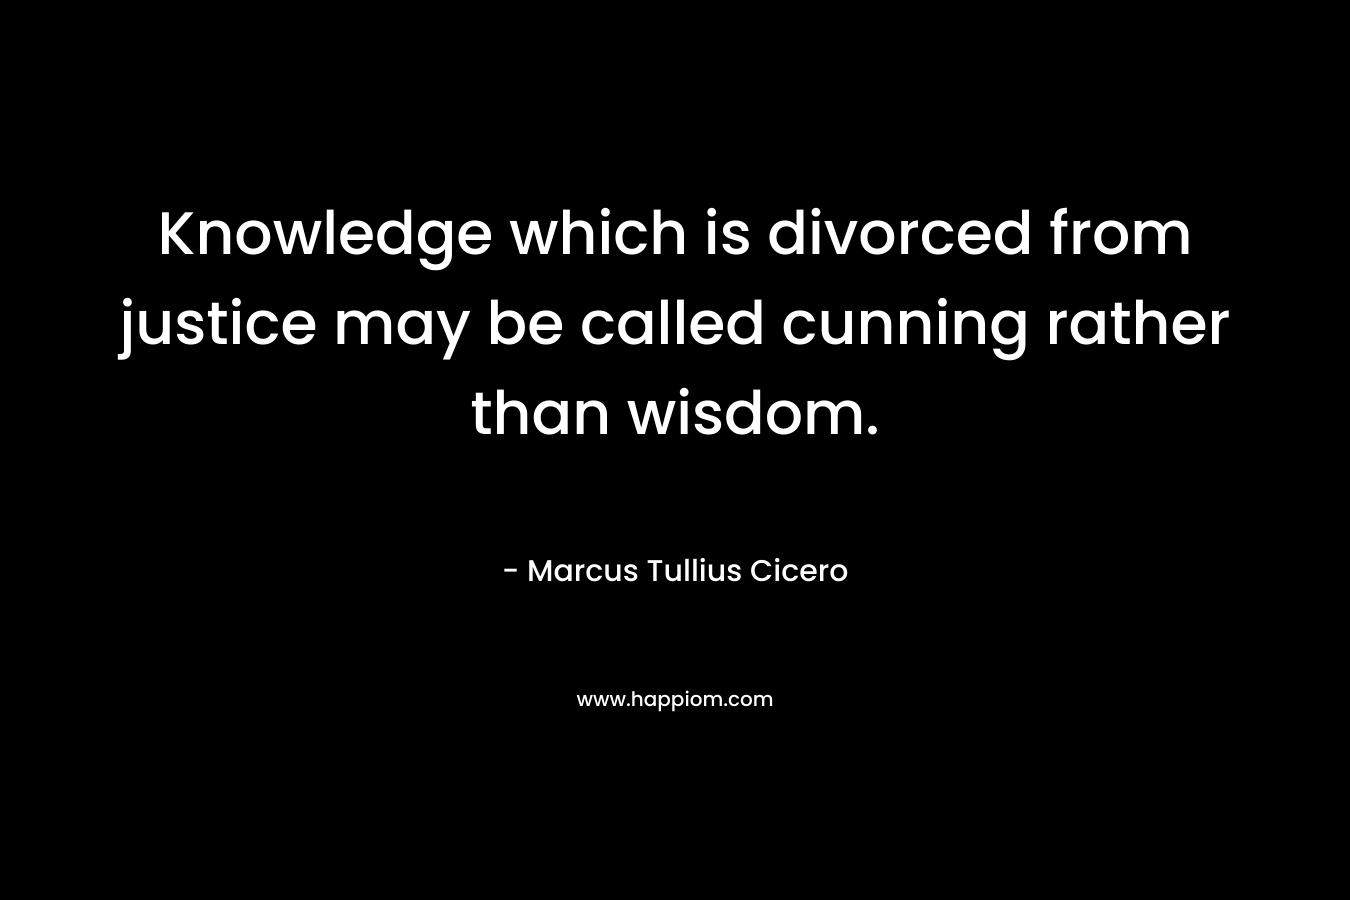 Knowledge which is divorced from justice may be called cunning rather than wisdom.